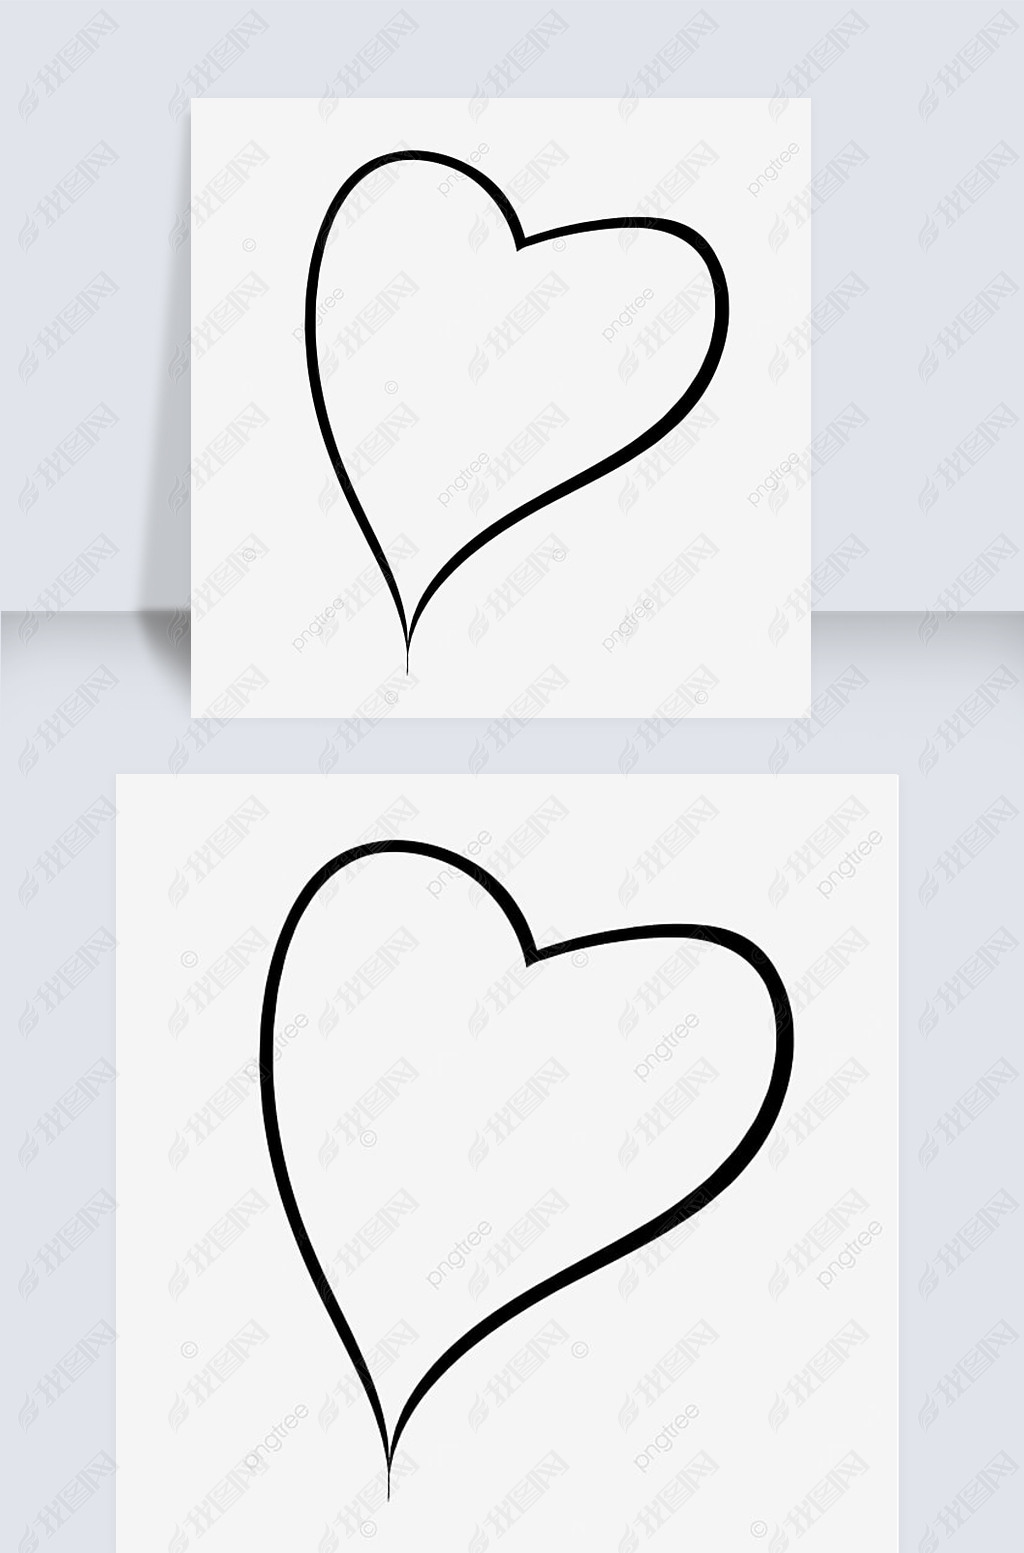 heart clipart black and whiteб